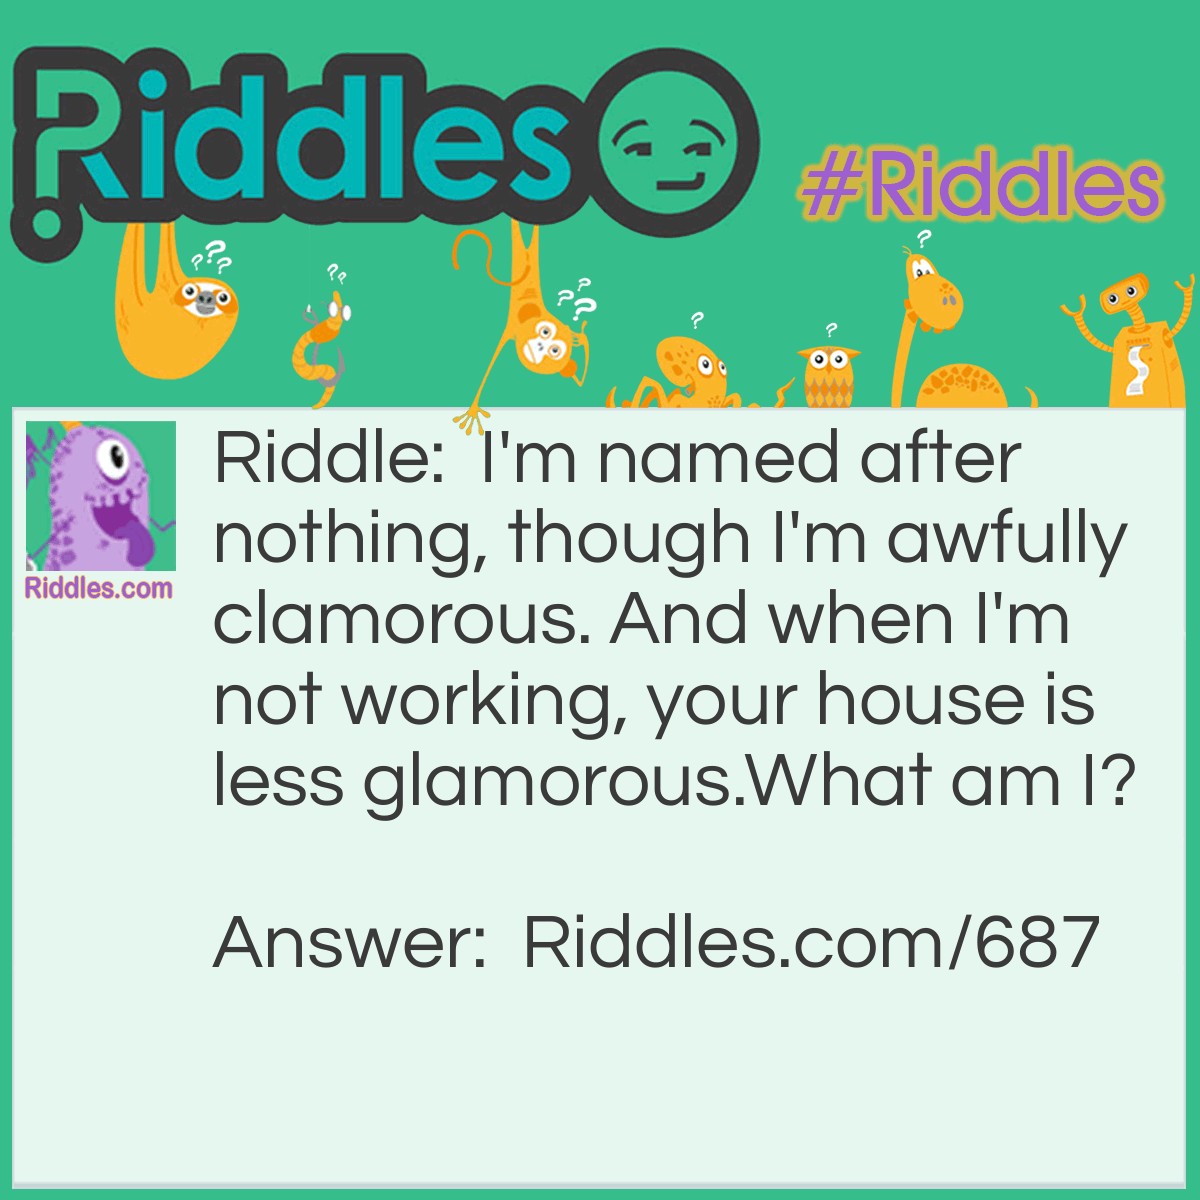 Riddle: I'm named after nothing, though I'm awfully clamorous. And when I'm not working, your house is less glamorous. 
What am I? Answer: A vacuum cleaner.